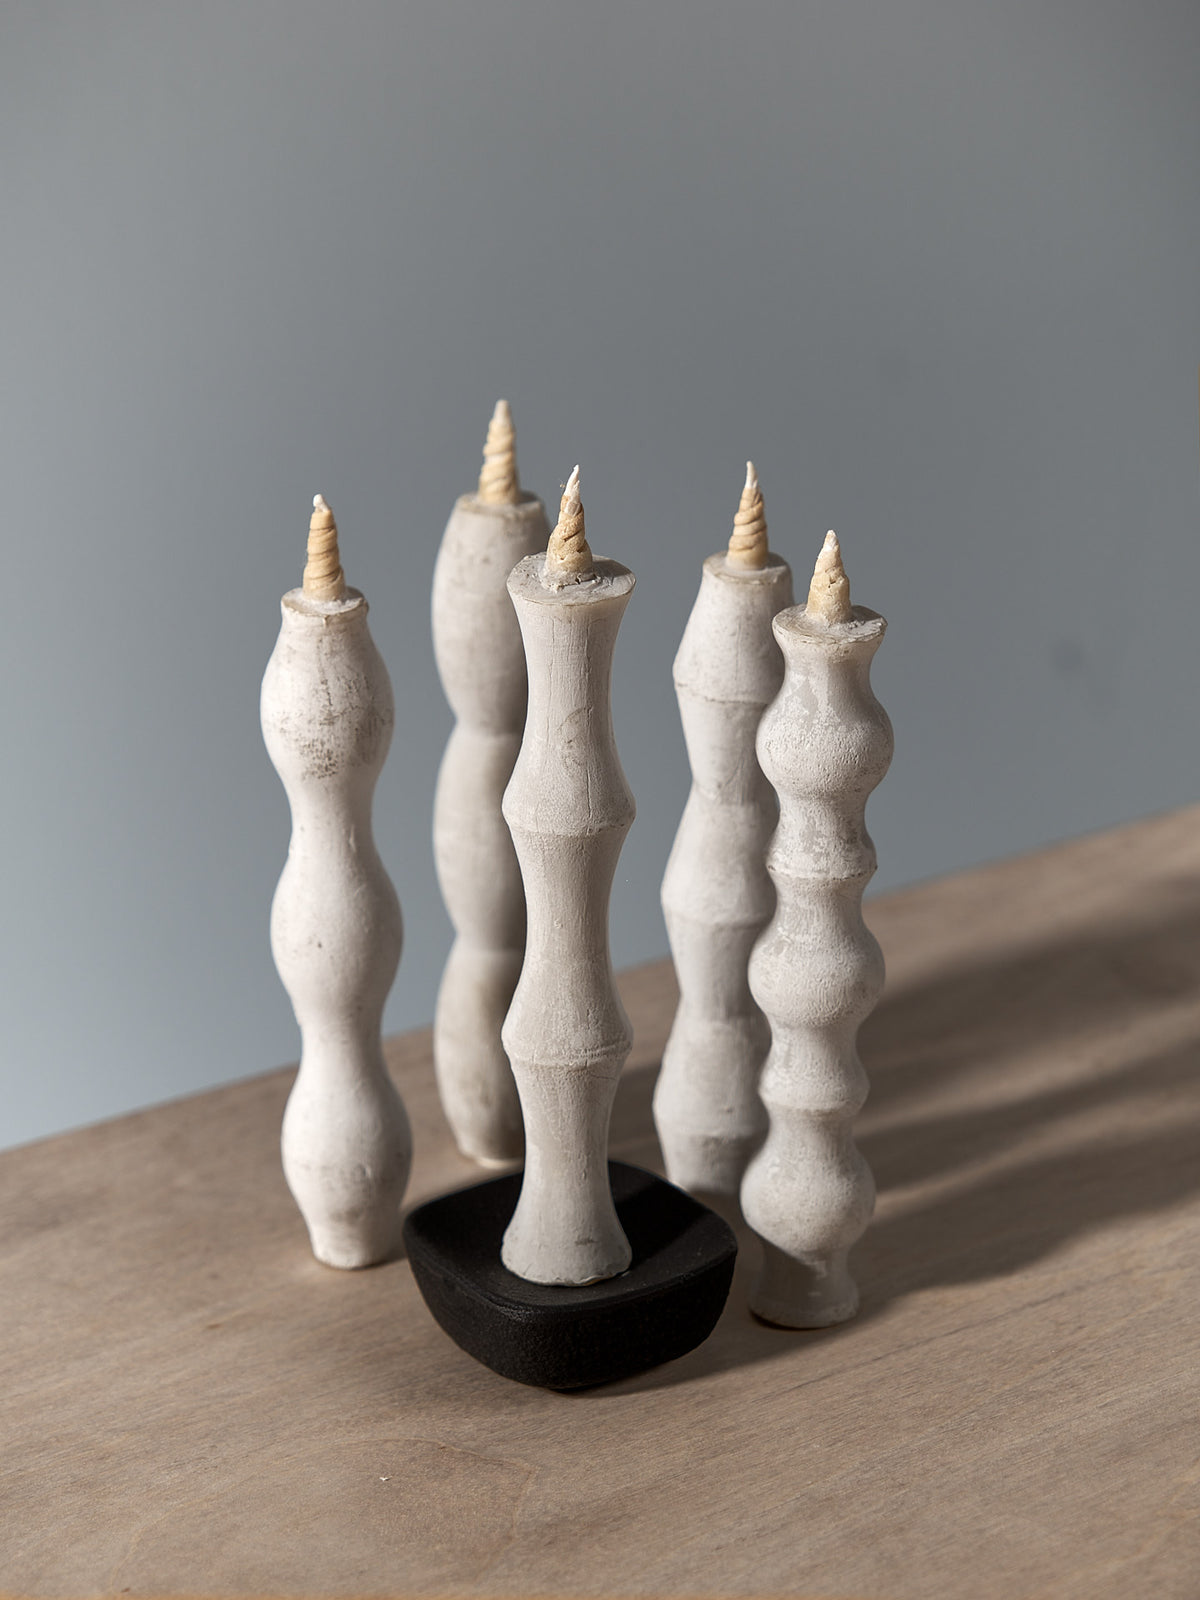 Four NANAO-P candle holders on a wooden table. (Brand: Takazawa)